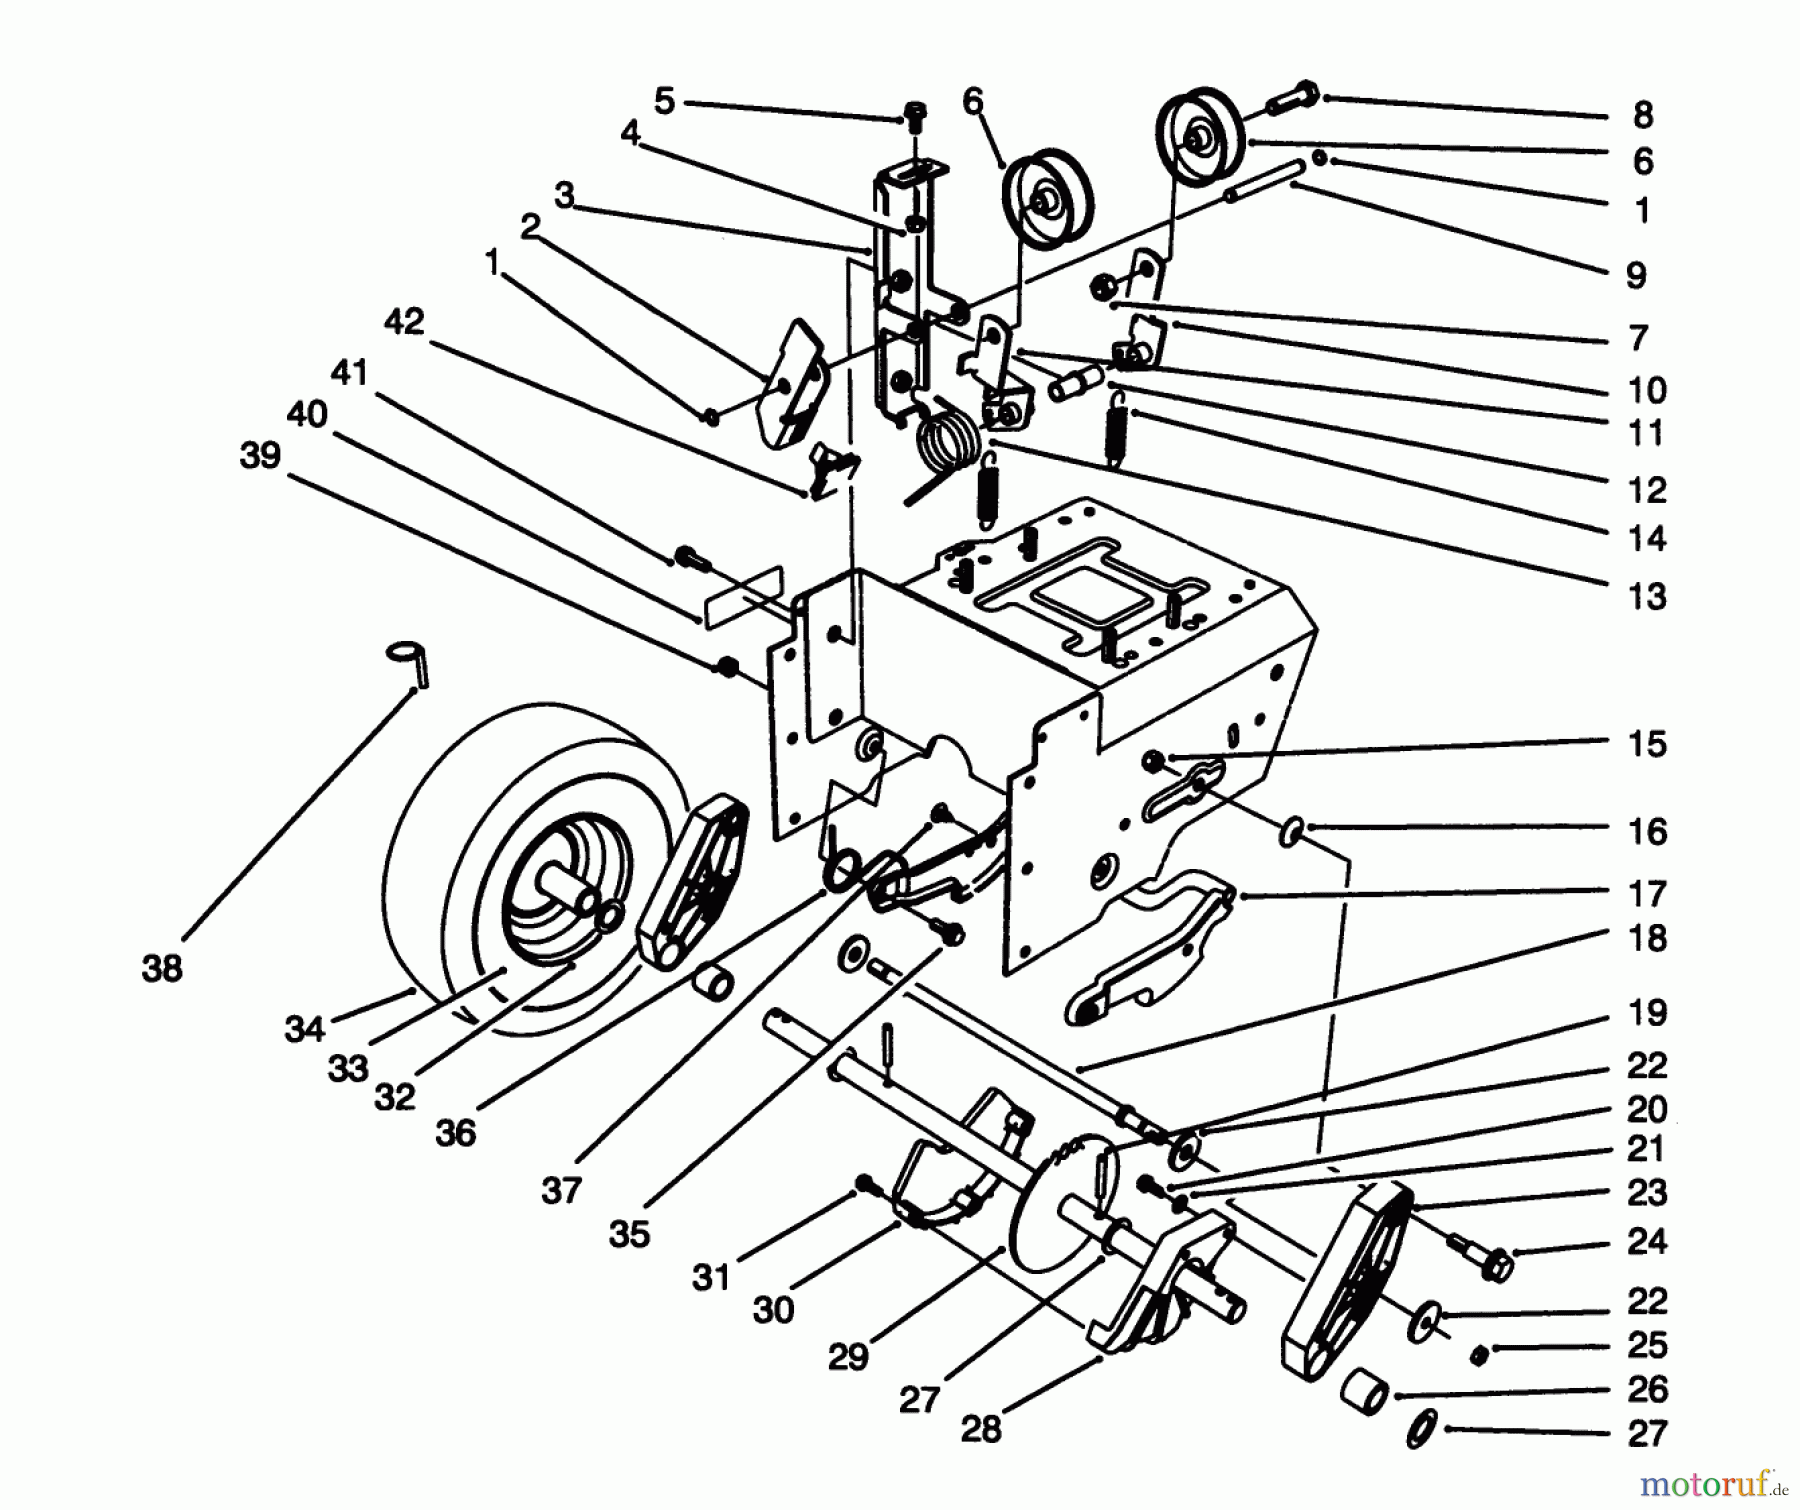  Toro Neu Snow Blowers/Snow Throwers Seite 1 38580 (1132) - Toro 1132 Power Shift Snowthrower, 1995 (5900001-5999999) TRACTION DRIVE ASSEMBLY